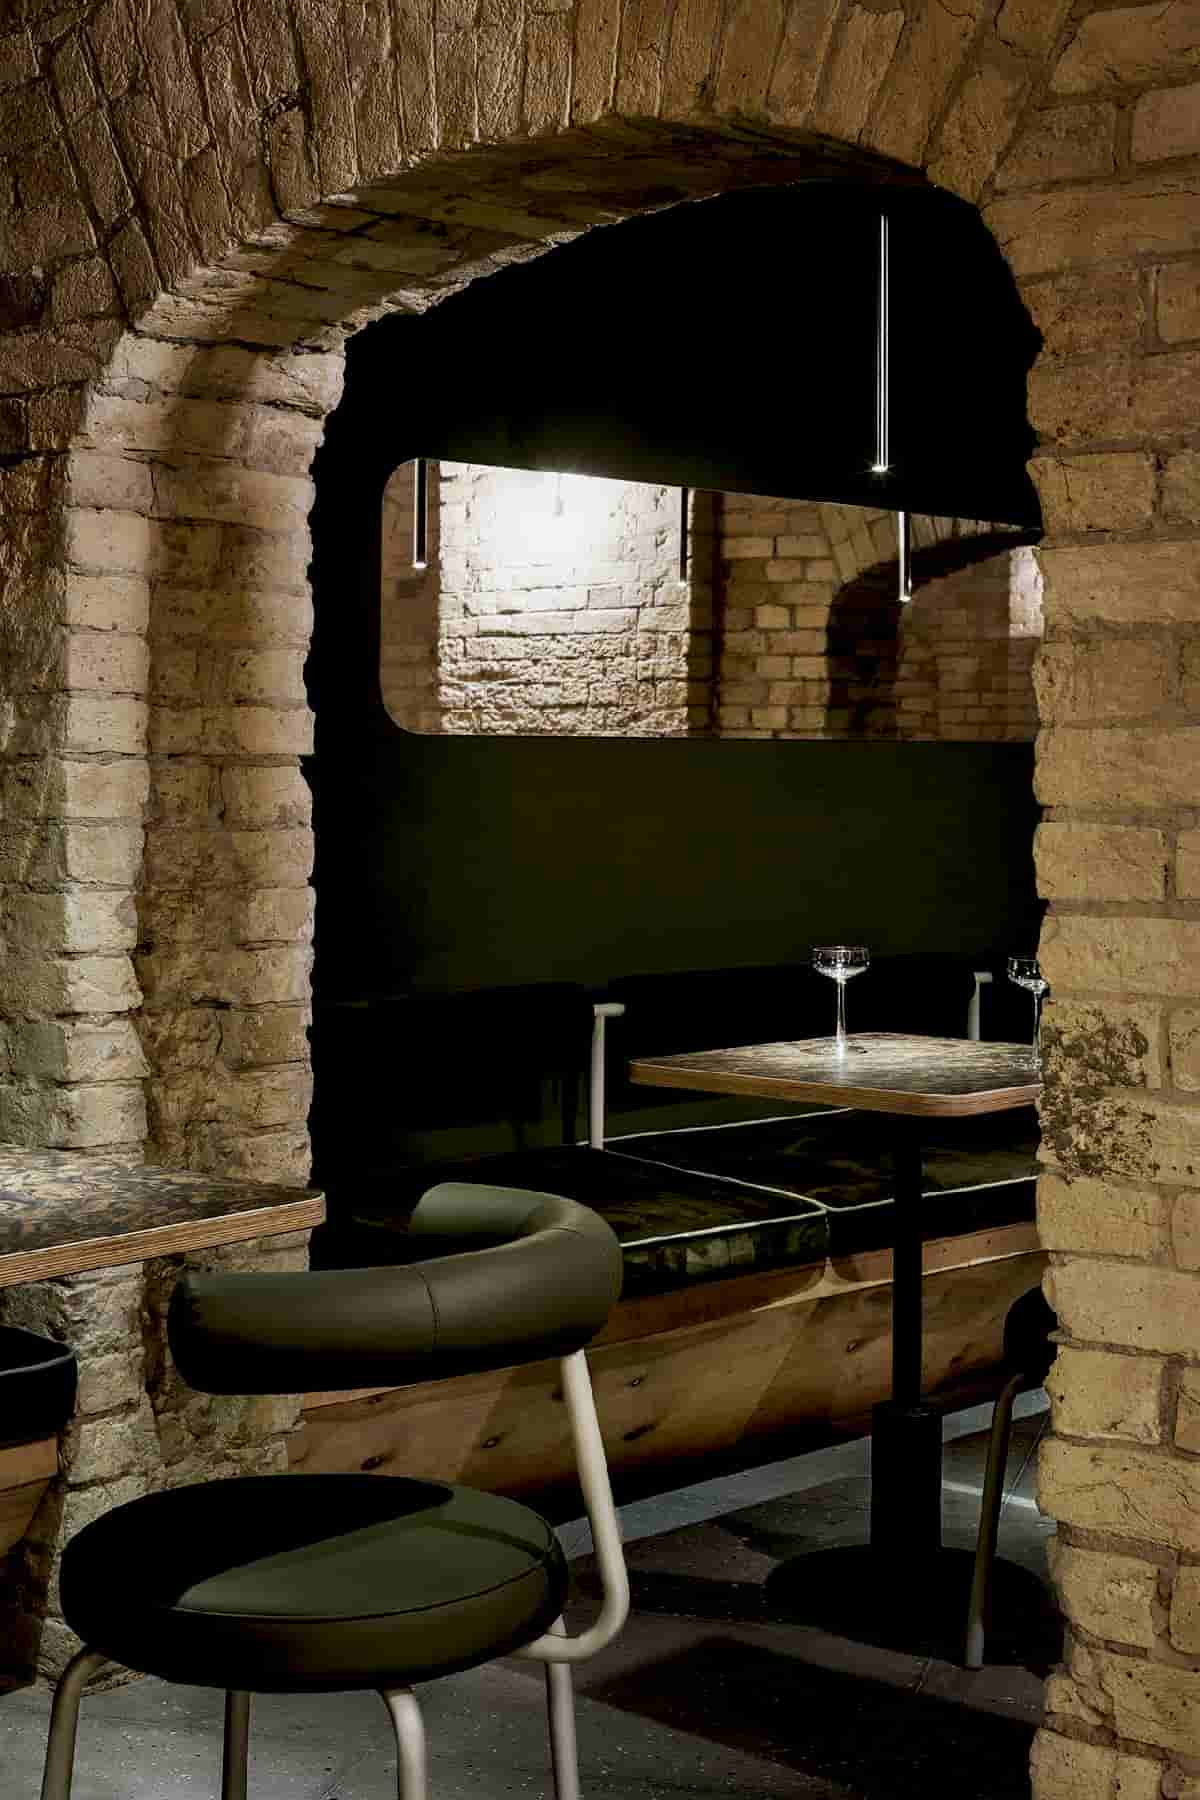 The Design as a Sublimely Chic Dungeon for Subterranean Allure of Balthazar Wine Bar in Kiev